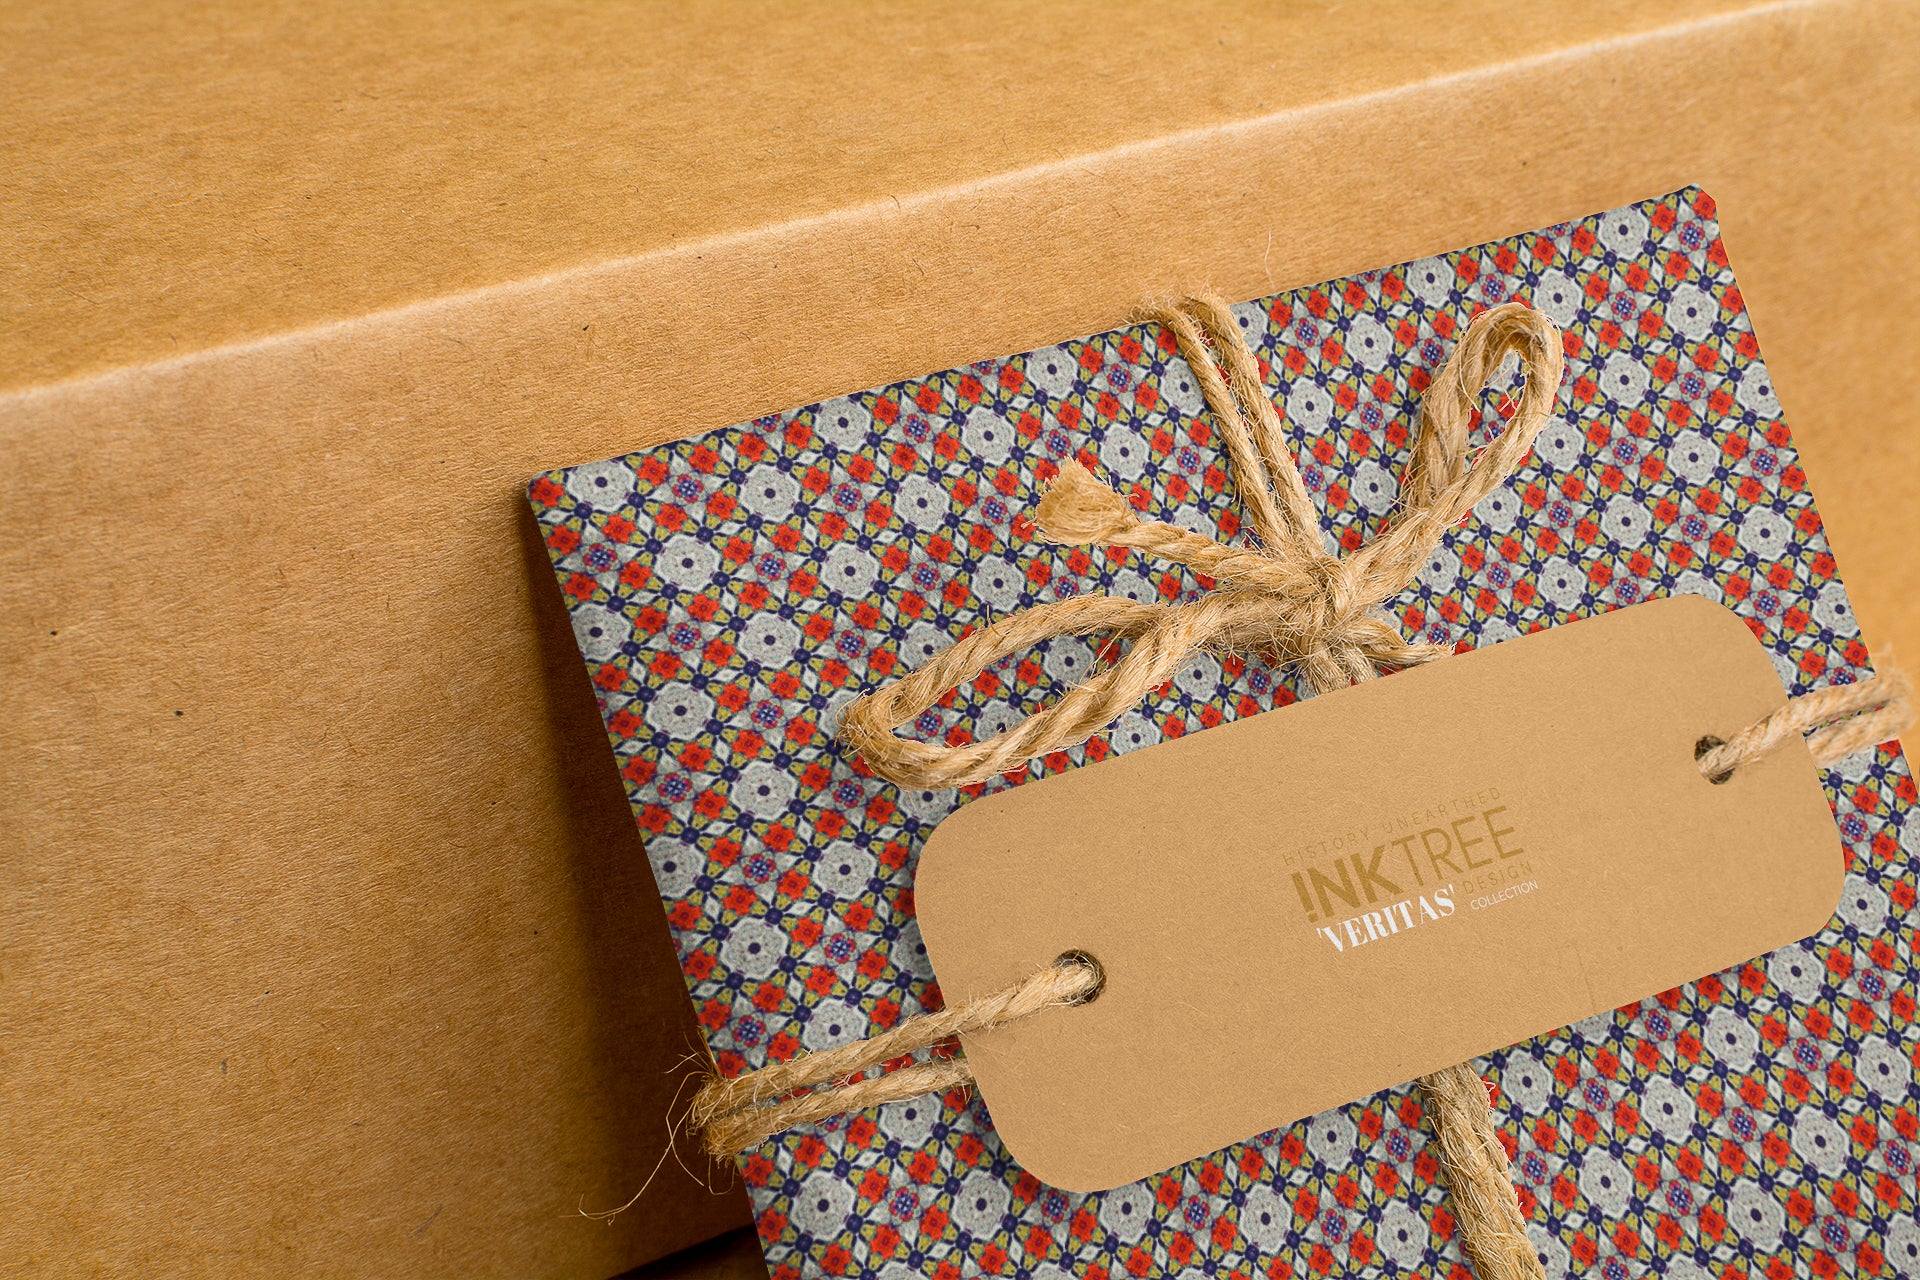 A present wrapped with blue, red and grey floral patterned paper, with a brown craft paper tag, tied with brown twine.  The background is brown craft warpping paper.